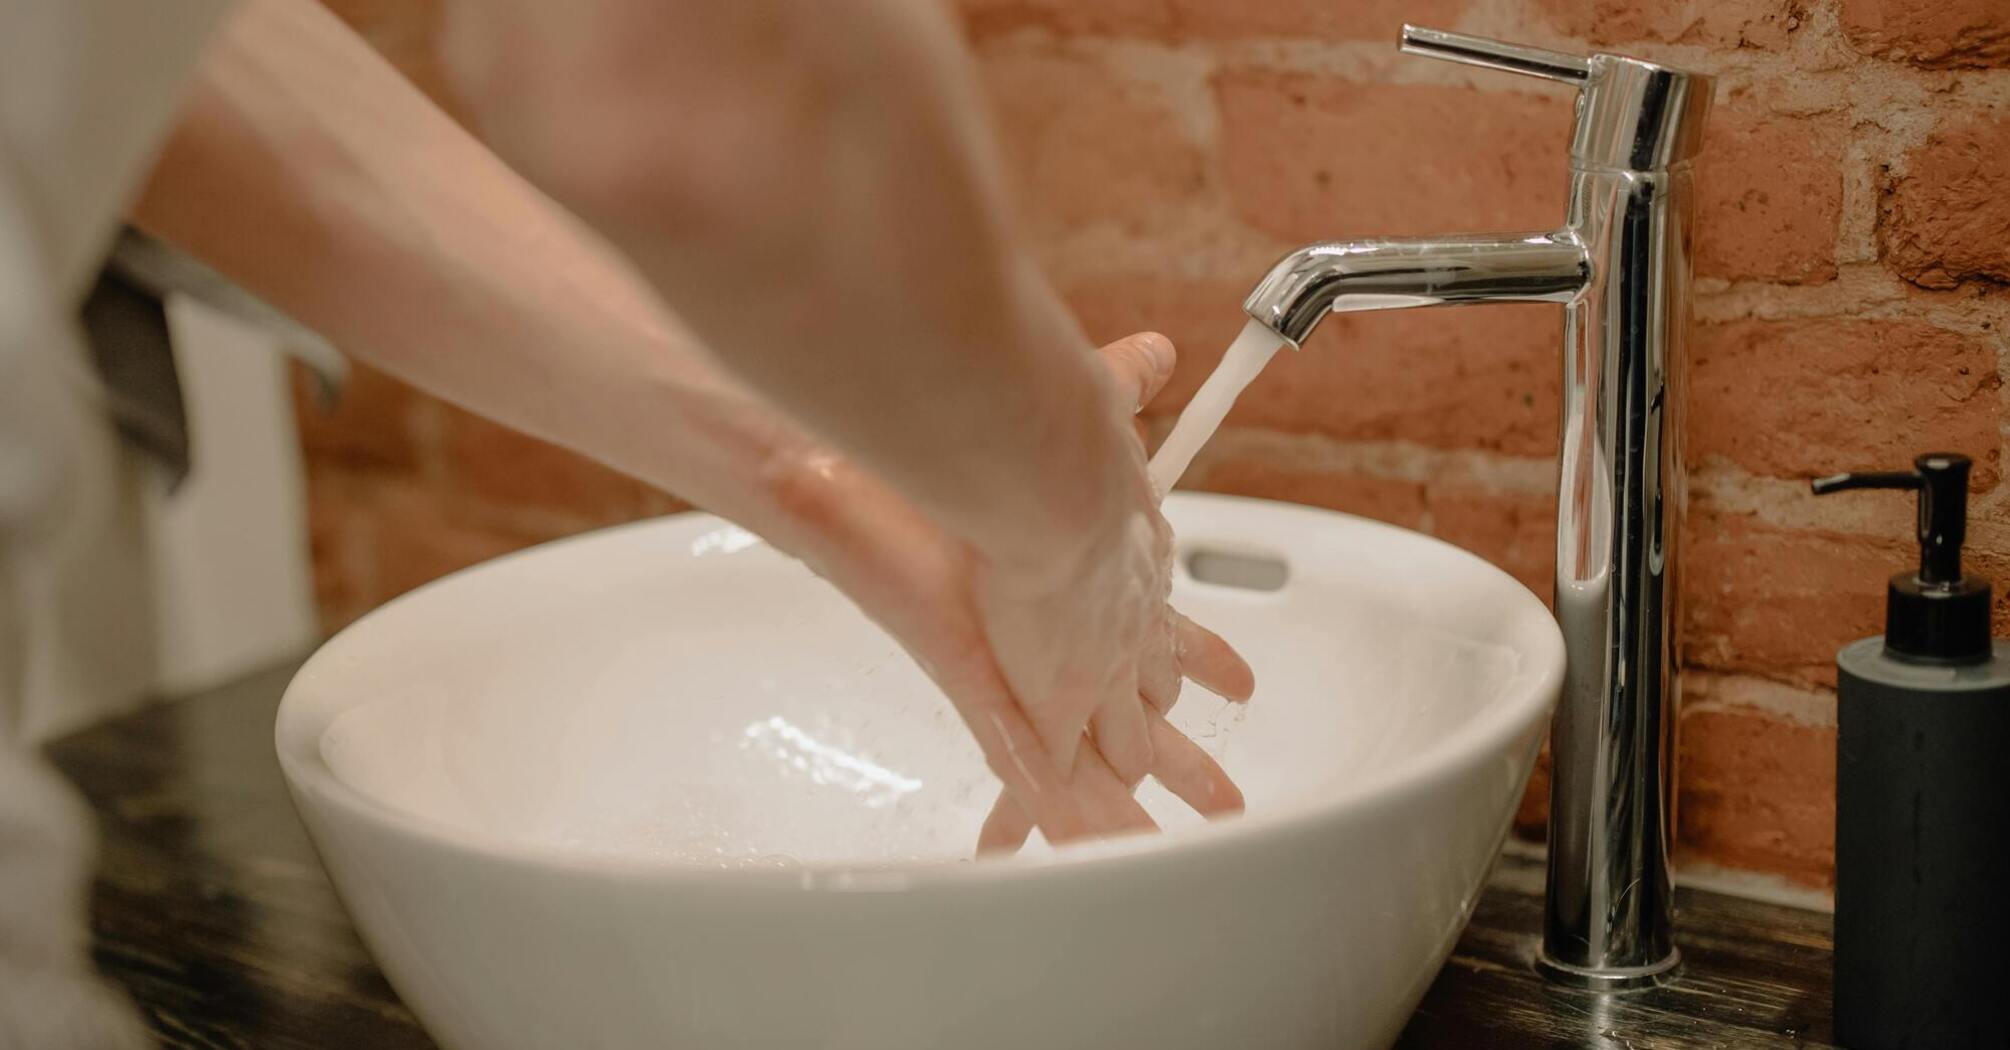 How often should you wash your hands for hygiene